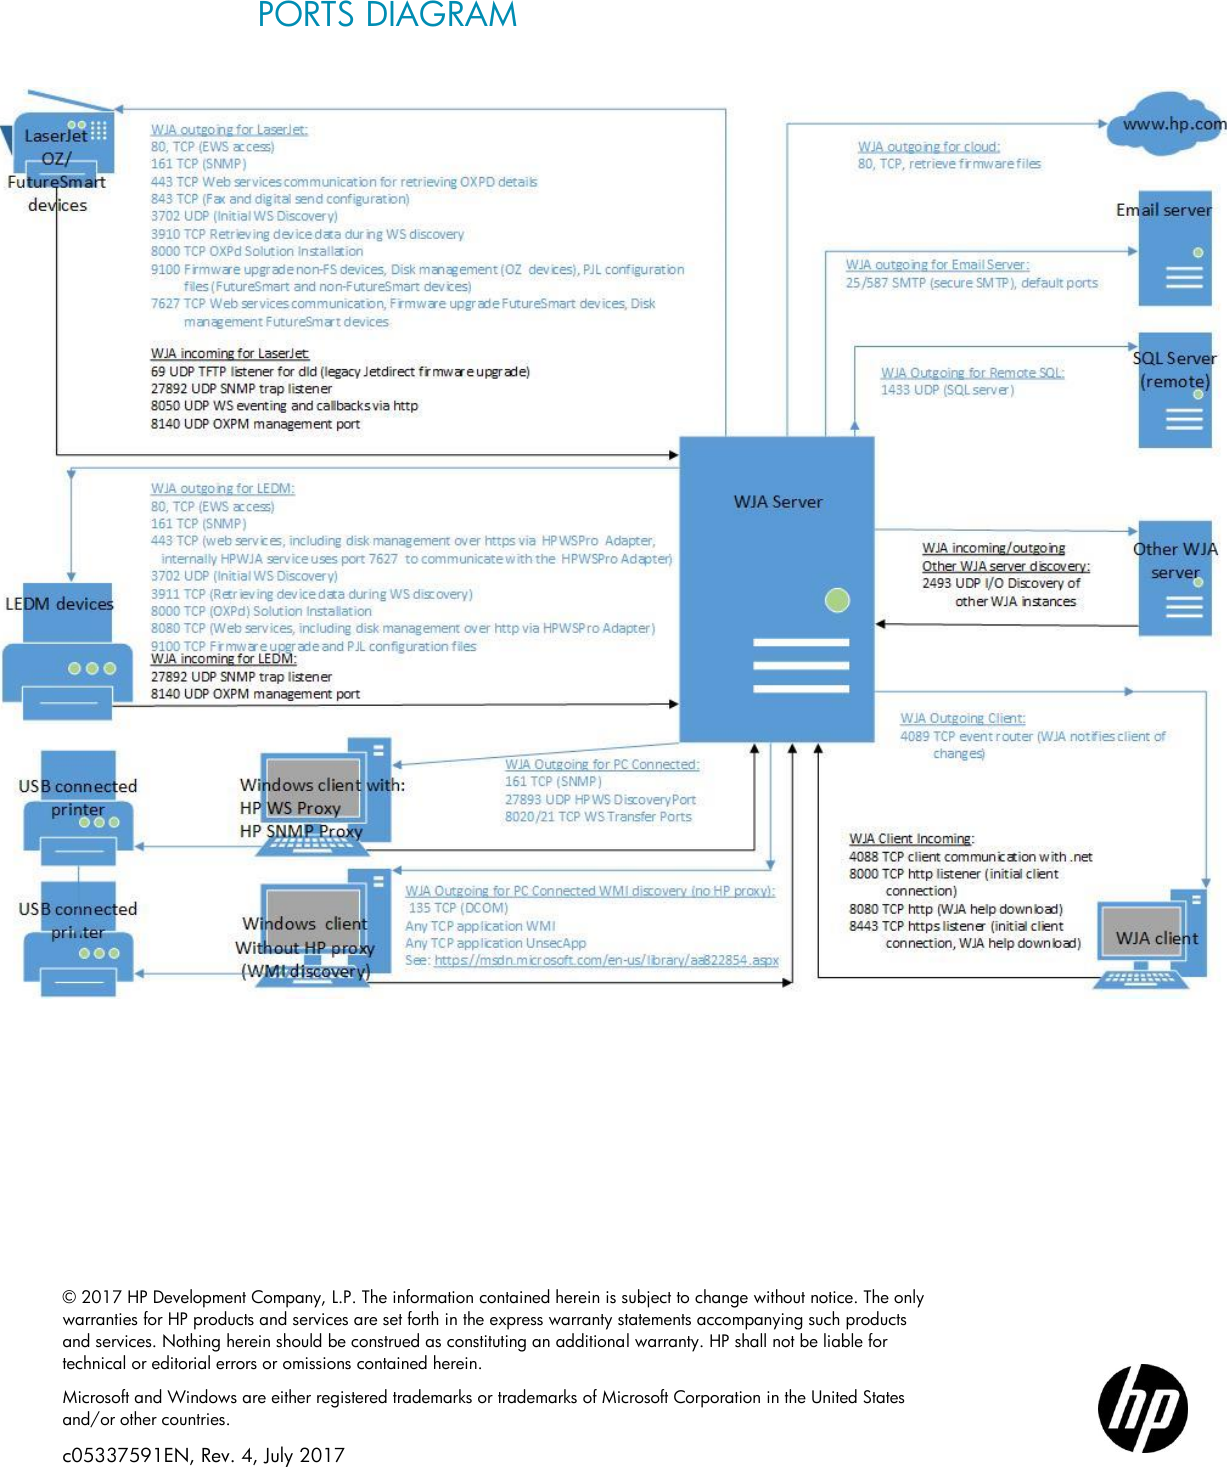 Page 3 of 3 - HP Open Web Jetadmin Required Ports In The Windows Firewall And Diagram - ENWW C05337591